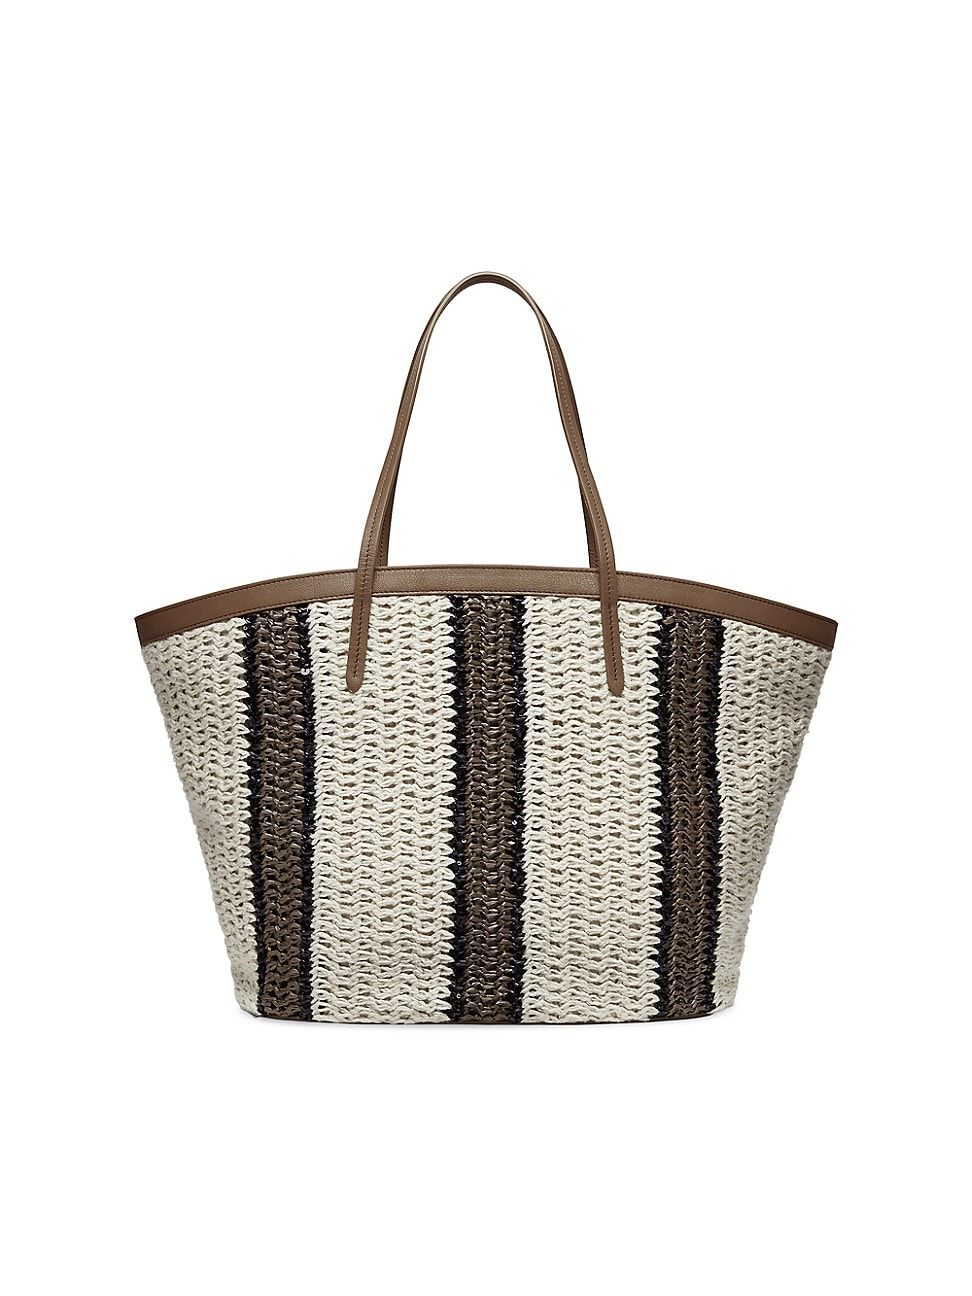 French Girl Straw Bags To Carry This Spring | LaVieOnGrand